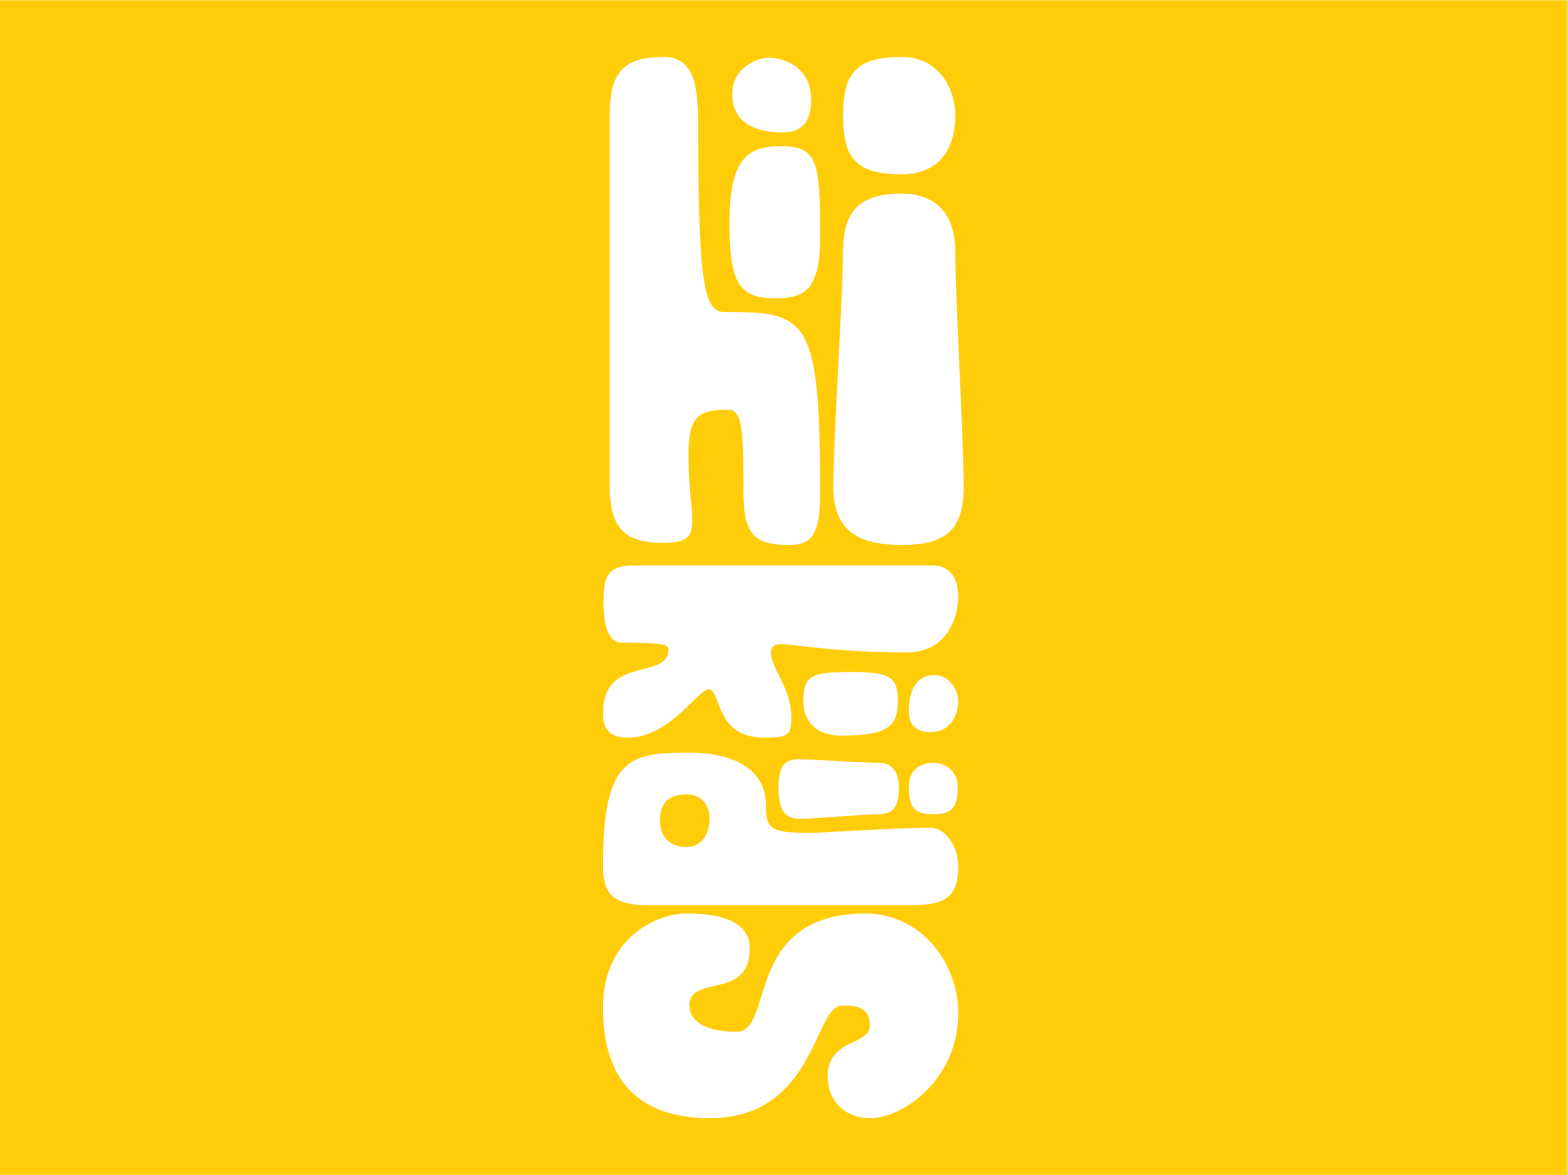 Hii Kiids Logo by Kyndall Smith on Dribbble